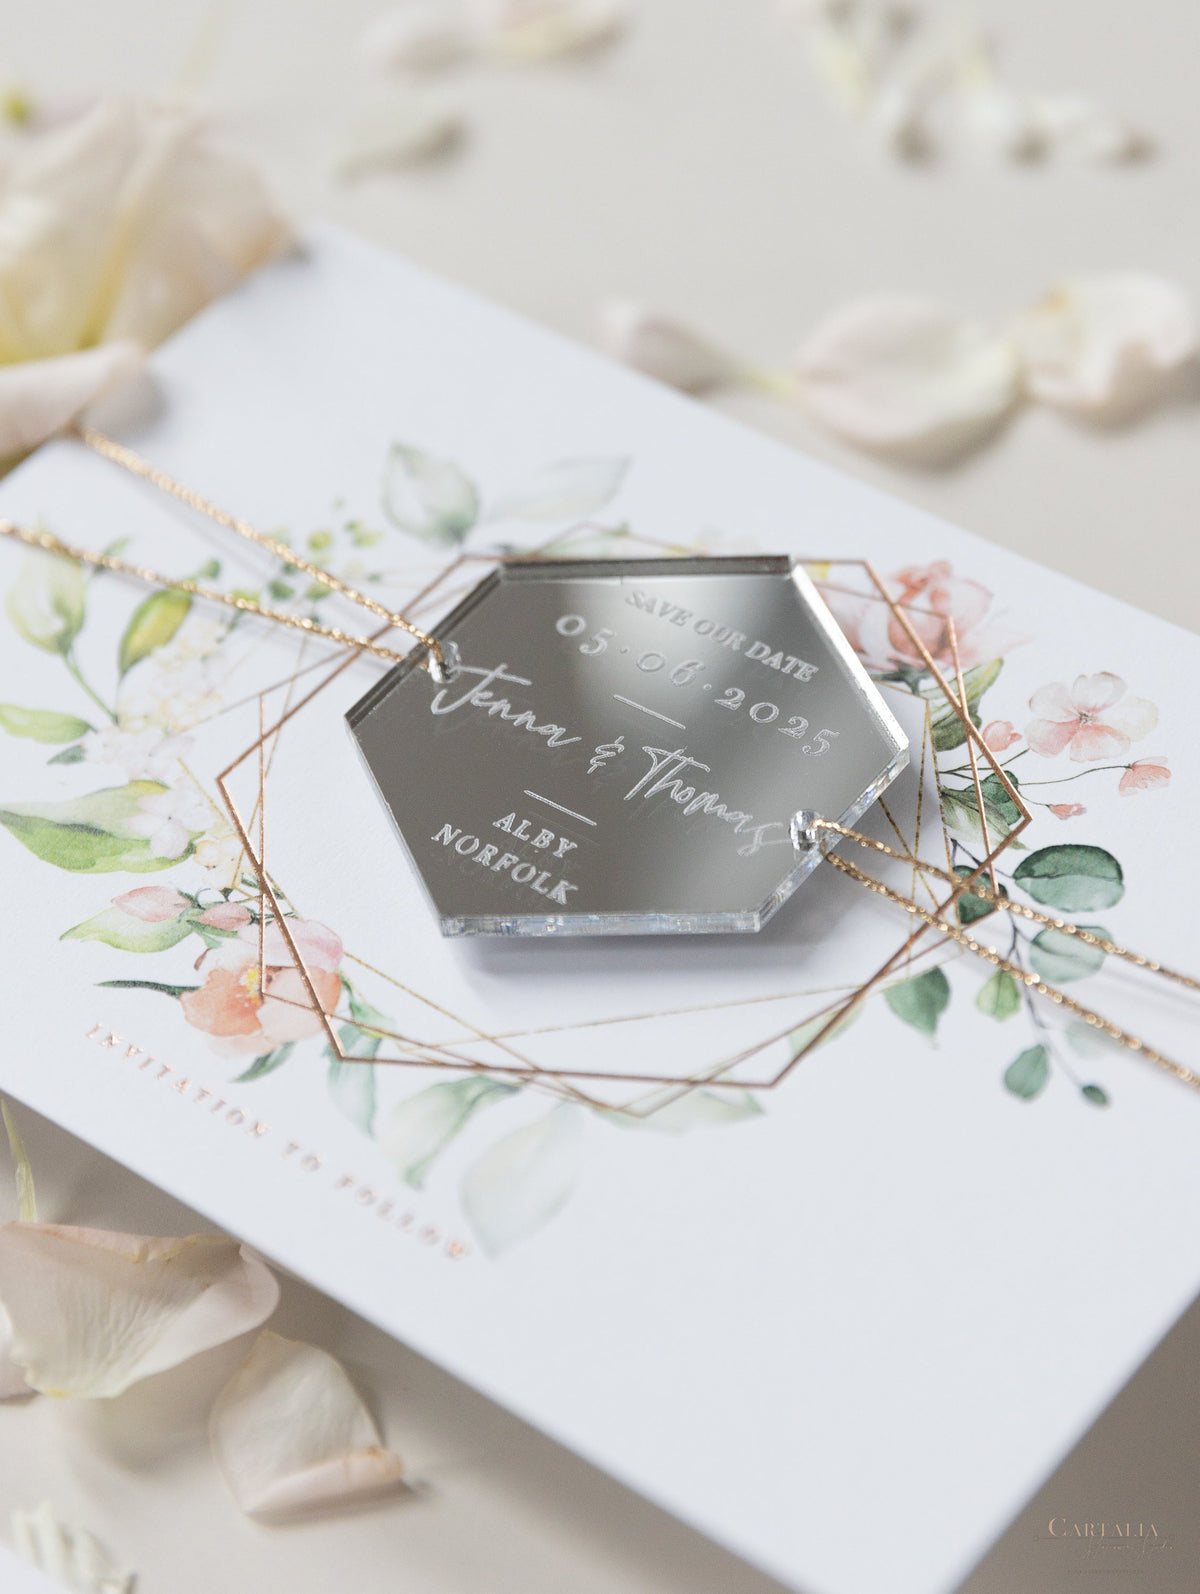 Hexagonal Mirror Magnet Personalised Engraving  Save the Date Card with Real Foil